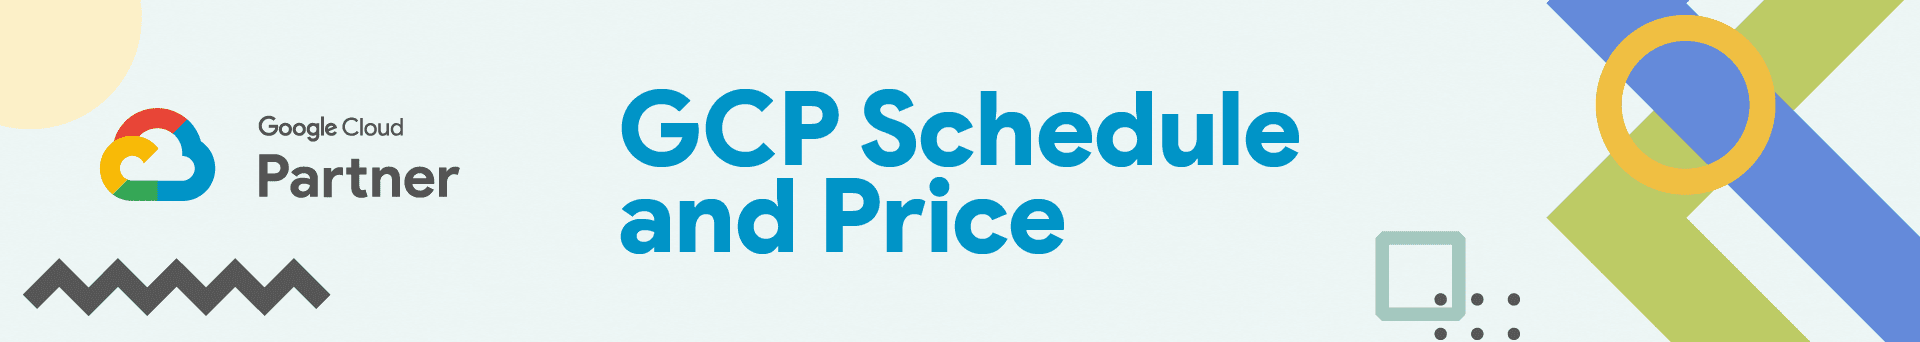 20230111 GCP Schedule and Price_highlight 1920x342